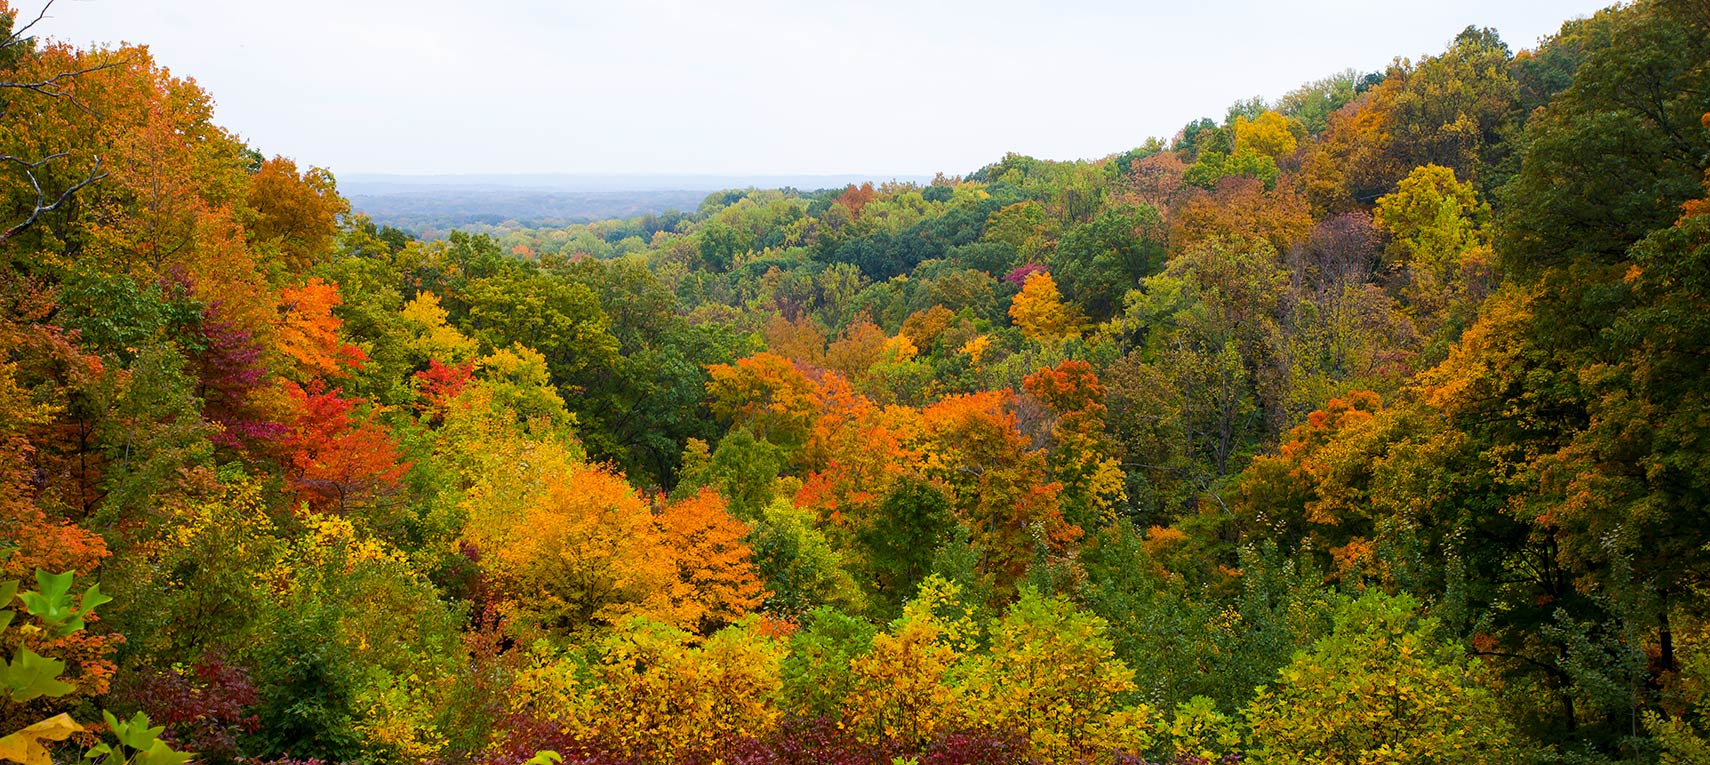 Fall season in Brown County State Park, Indiana